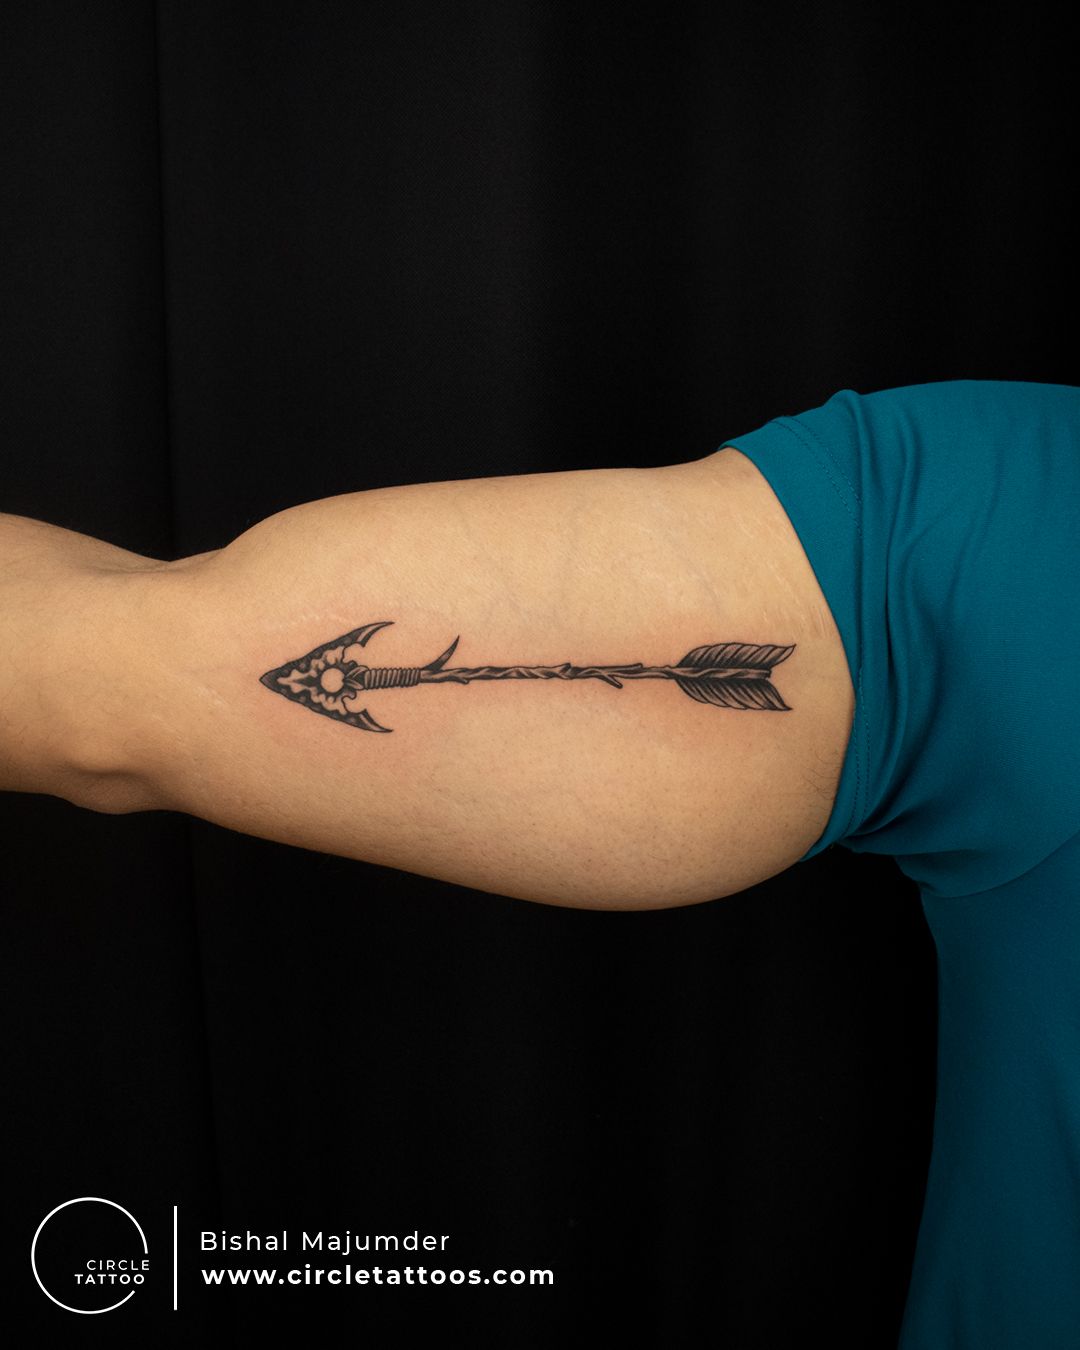 20 Arrow Tattoos That Are Creative & Meaningful | CafeMom.com